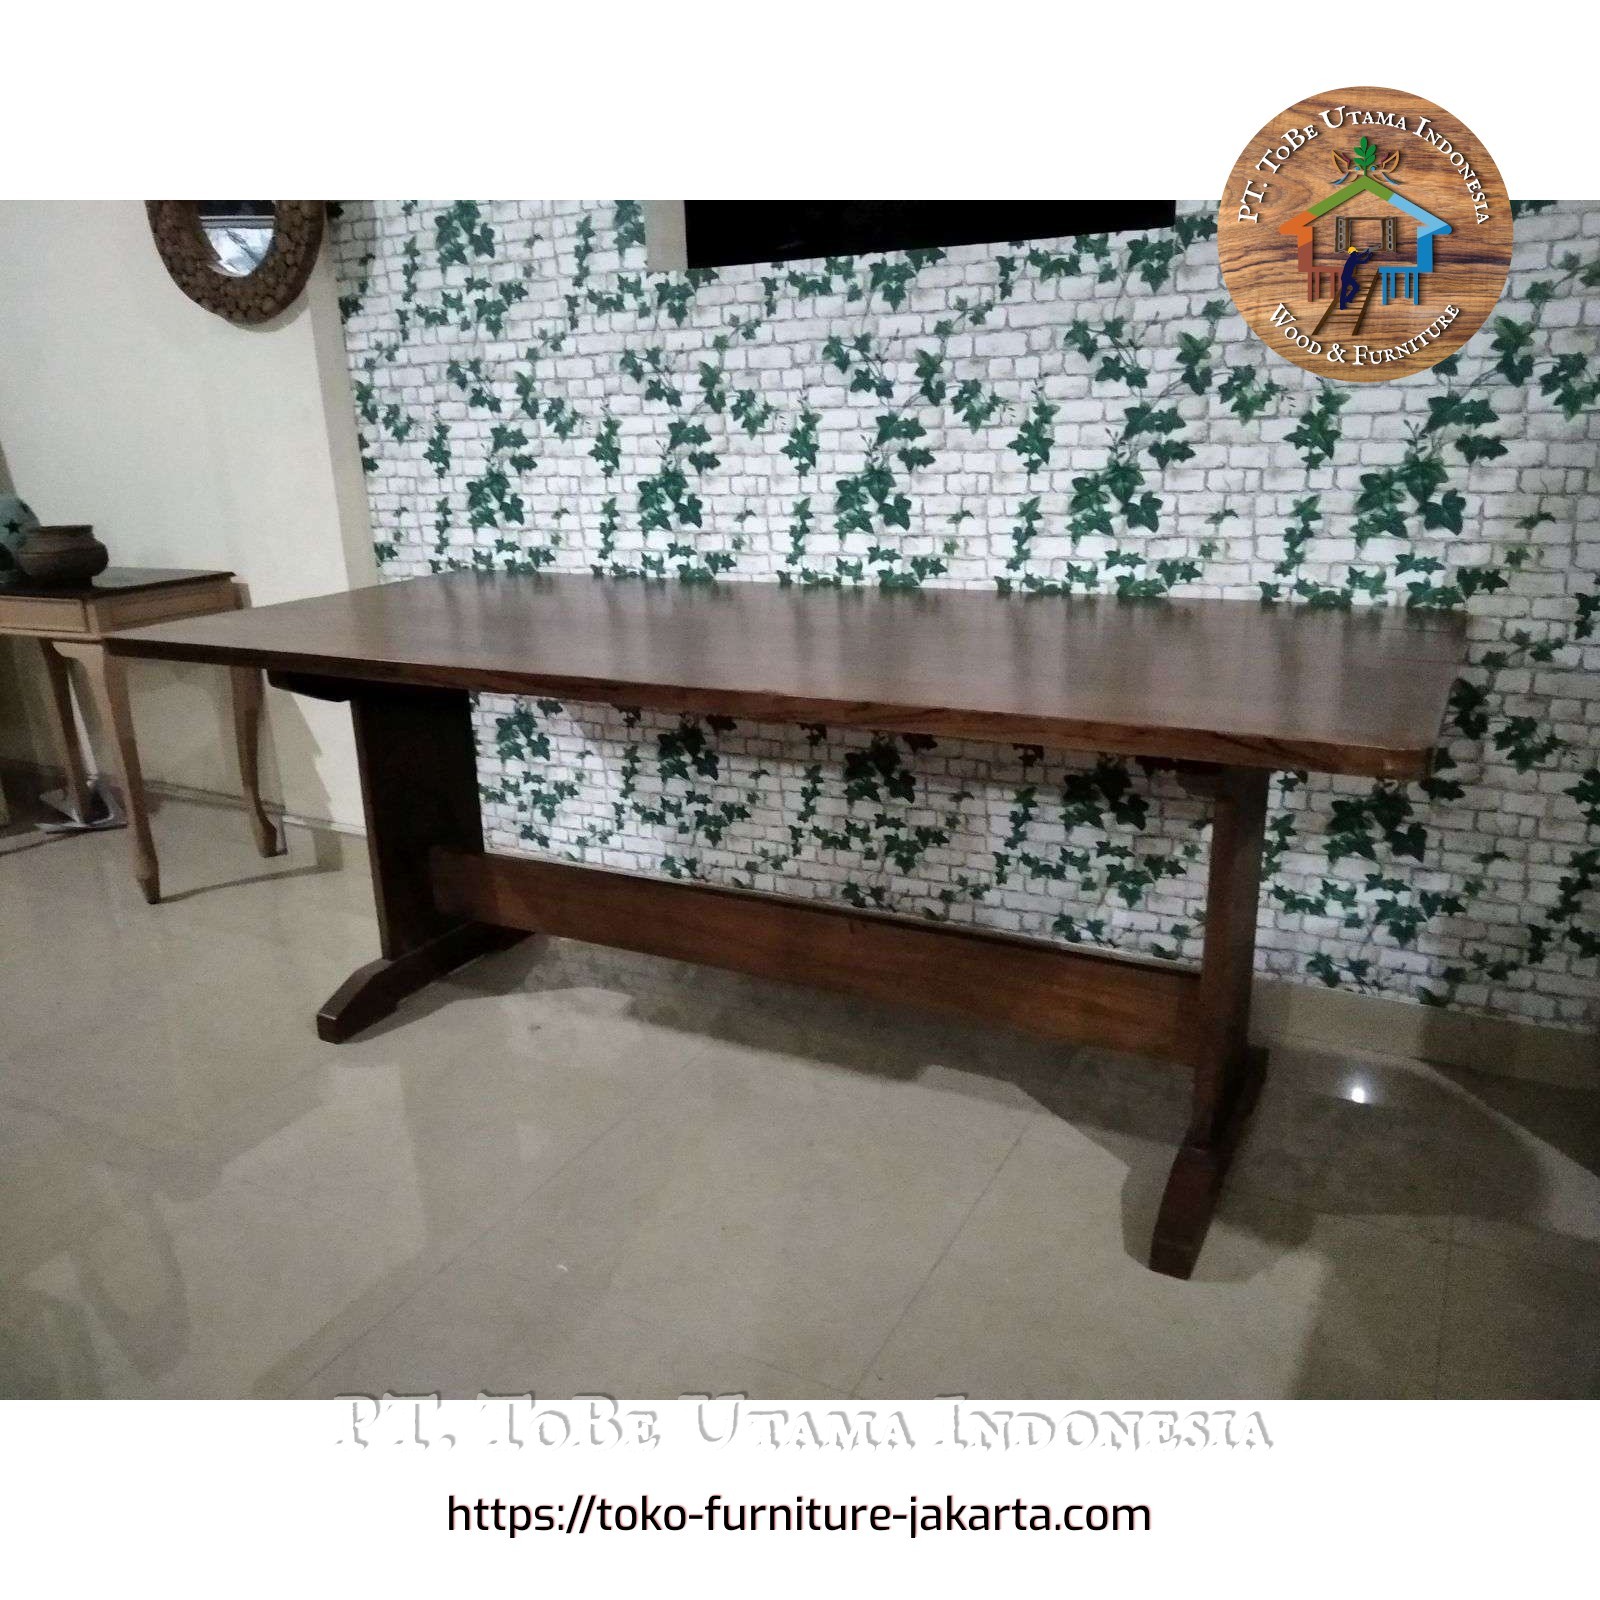 Dining Room - Dining Tables: Teak Wood Family Dining Table made of teakwood (image 1 of 1).